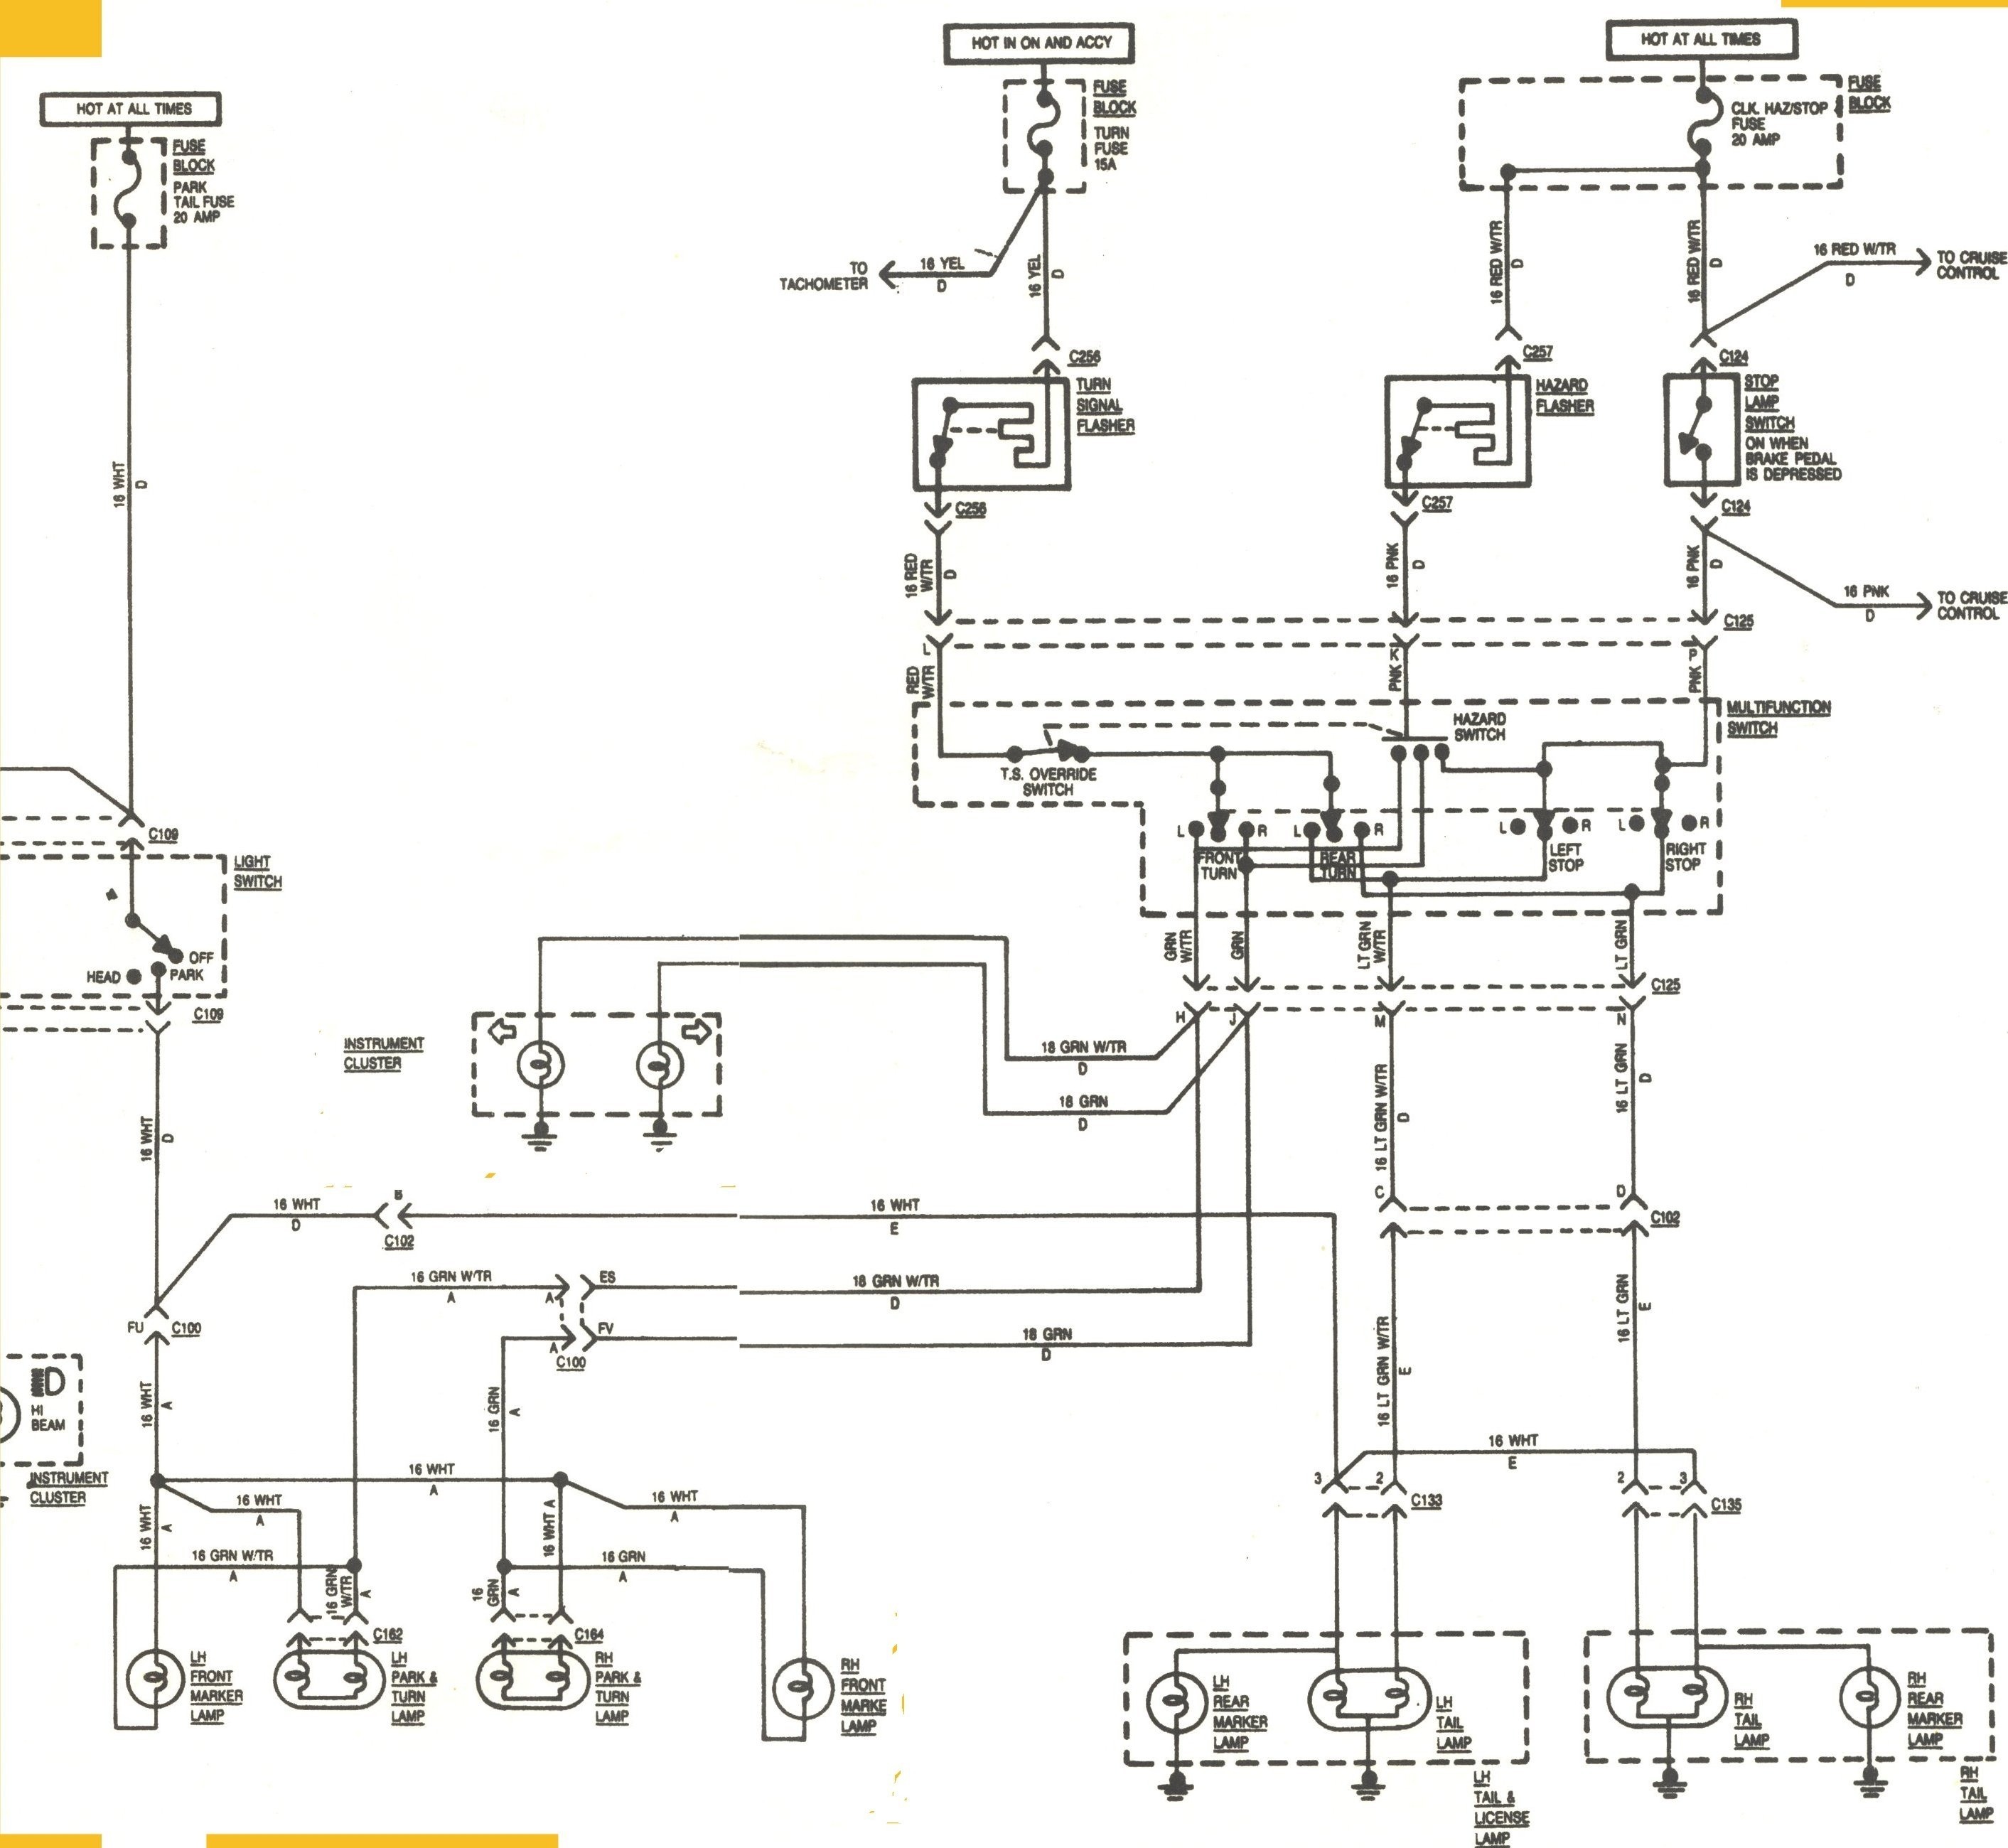 Blinker Wiring Diagram Awesome Turn Signal Switch Wiring Diagram Ideas Everything You